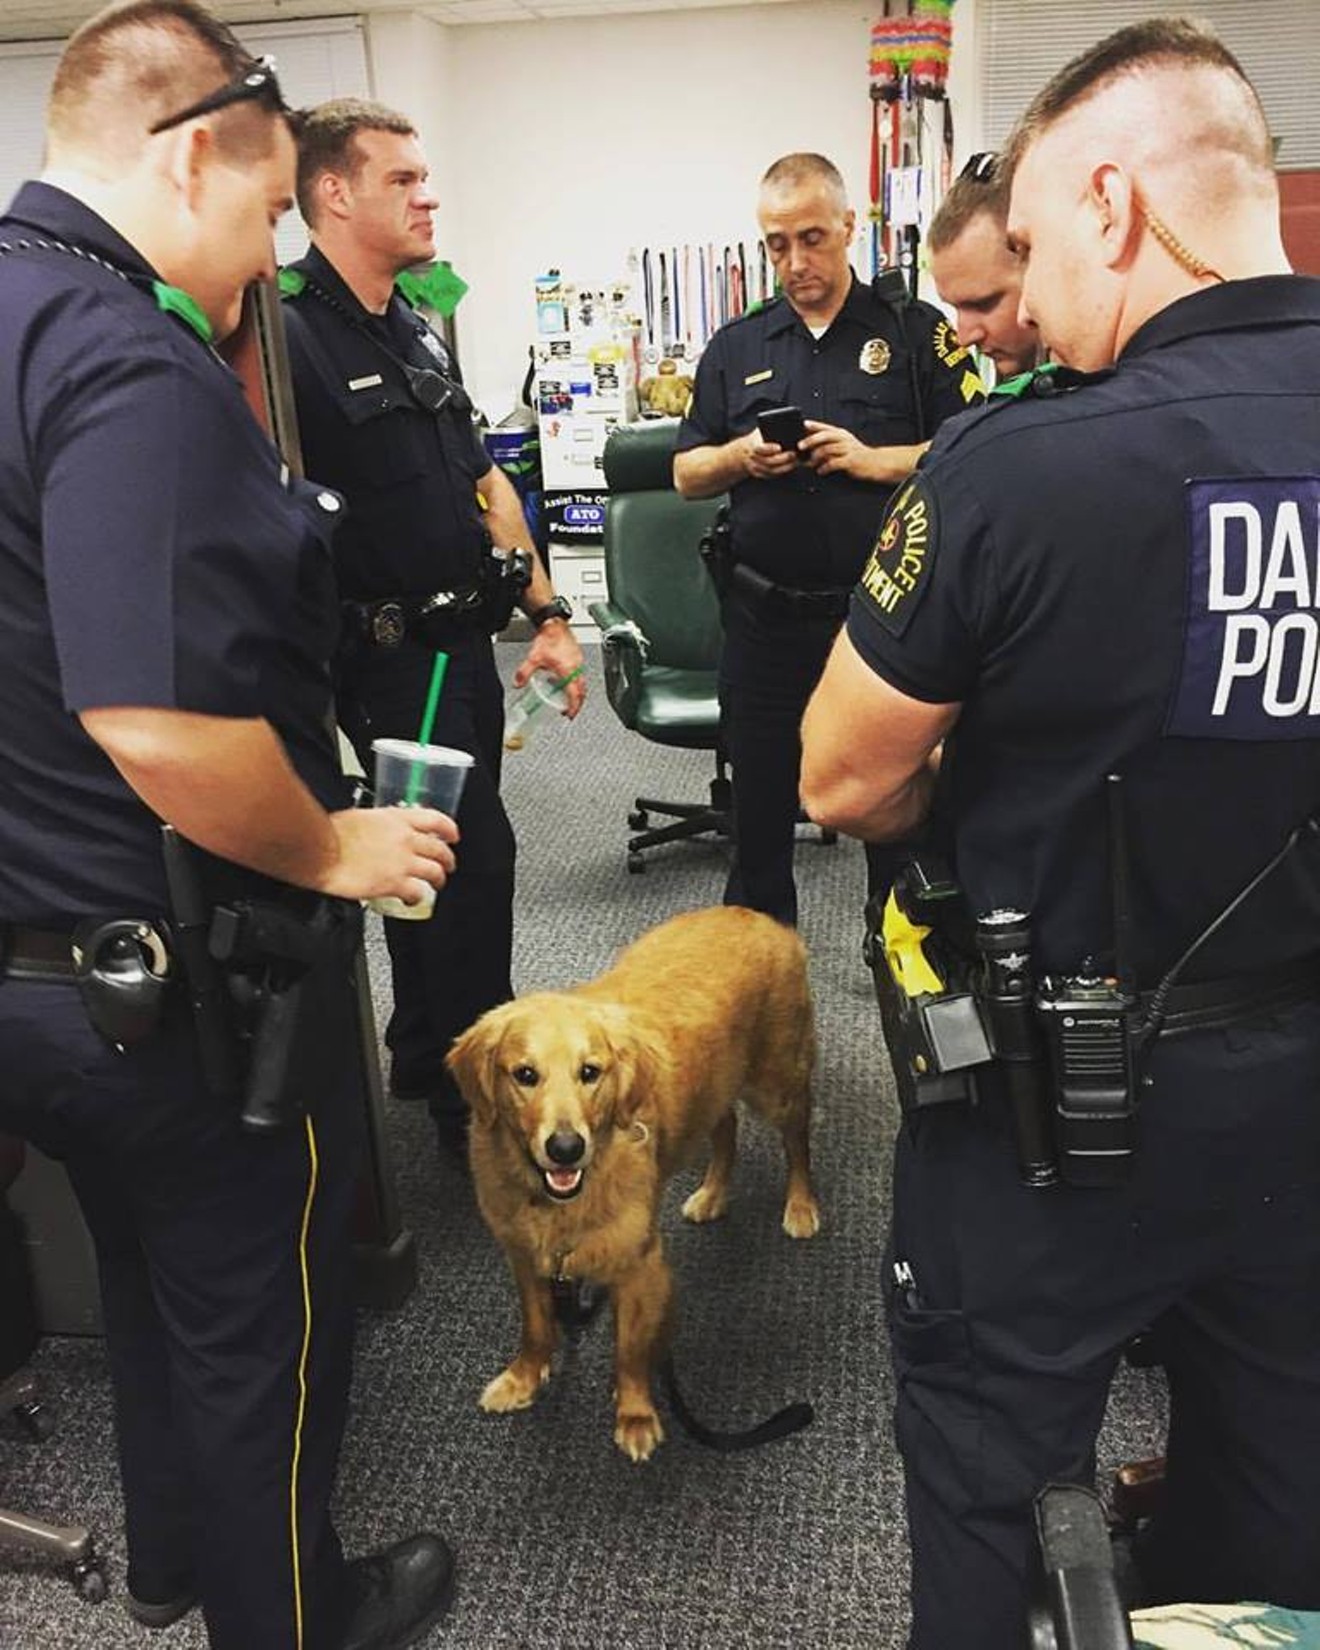 Brisbane is one of 11 therapy dogs who have been coming to the aid of police officers across DFW.